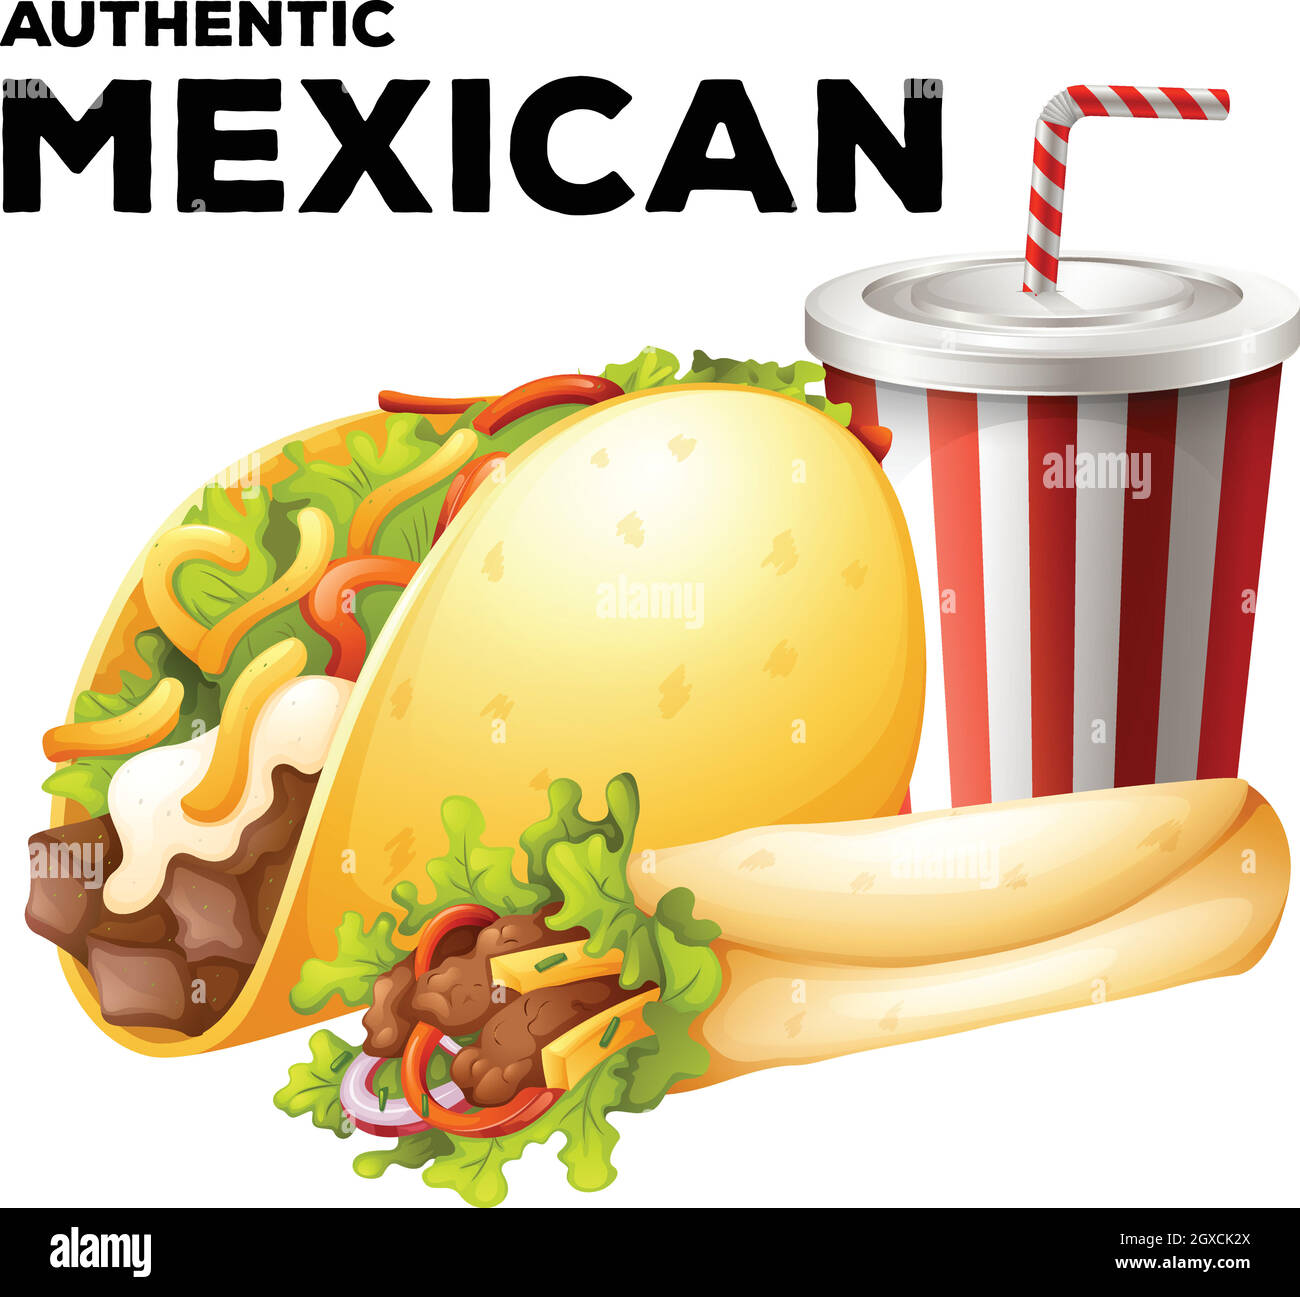 Mexican food with taco and burrito Stock Vector